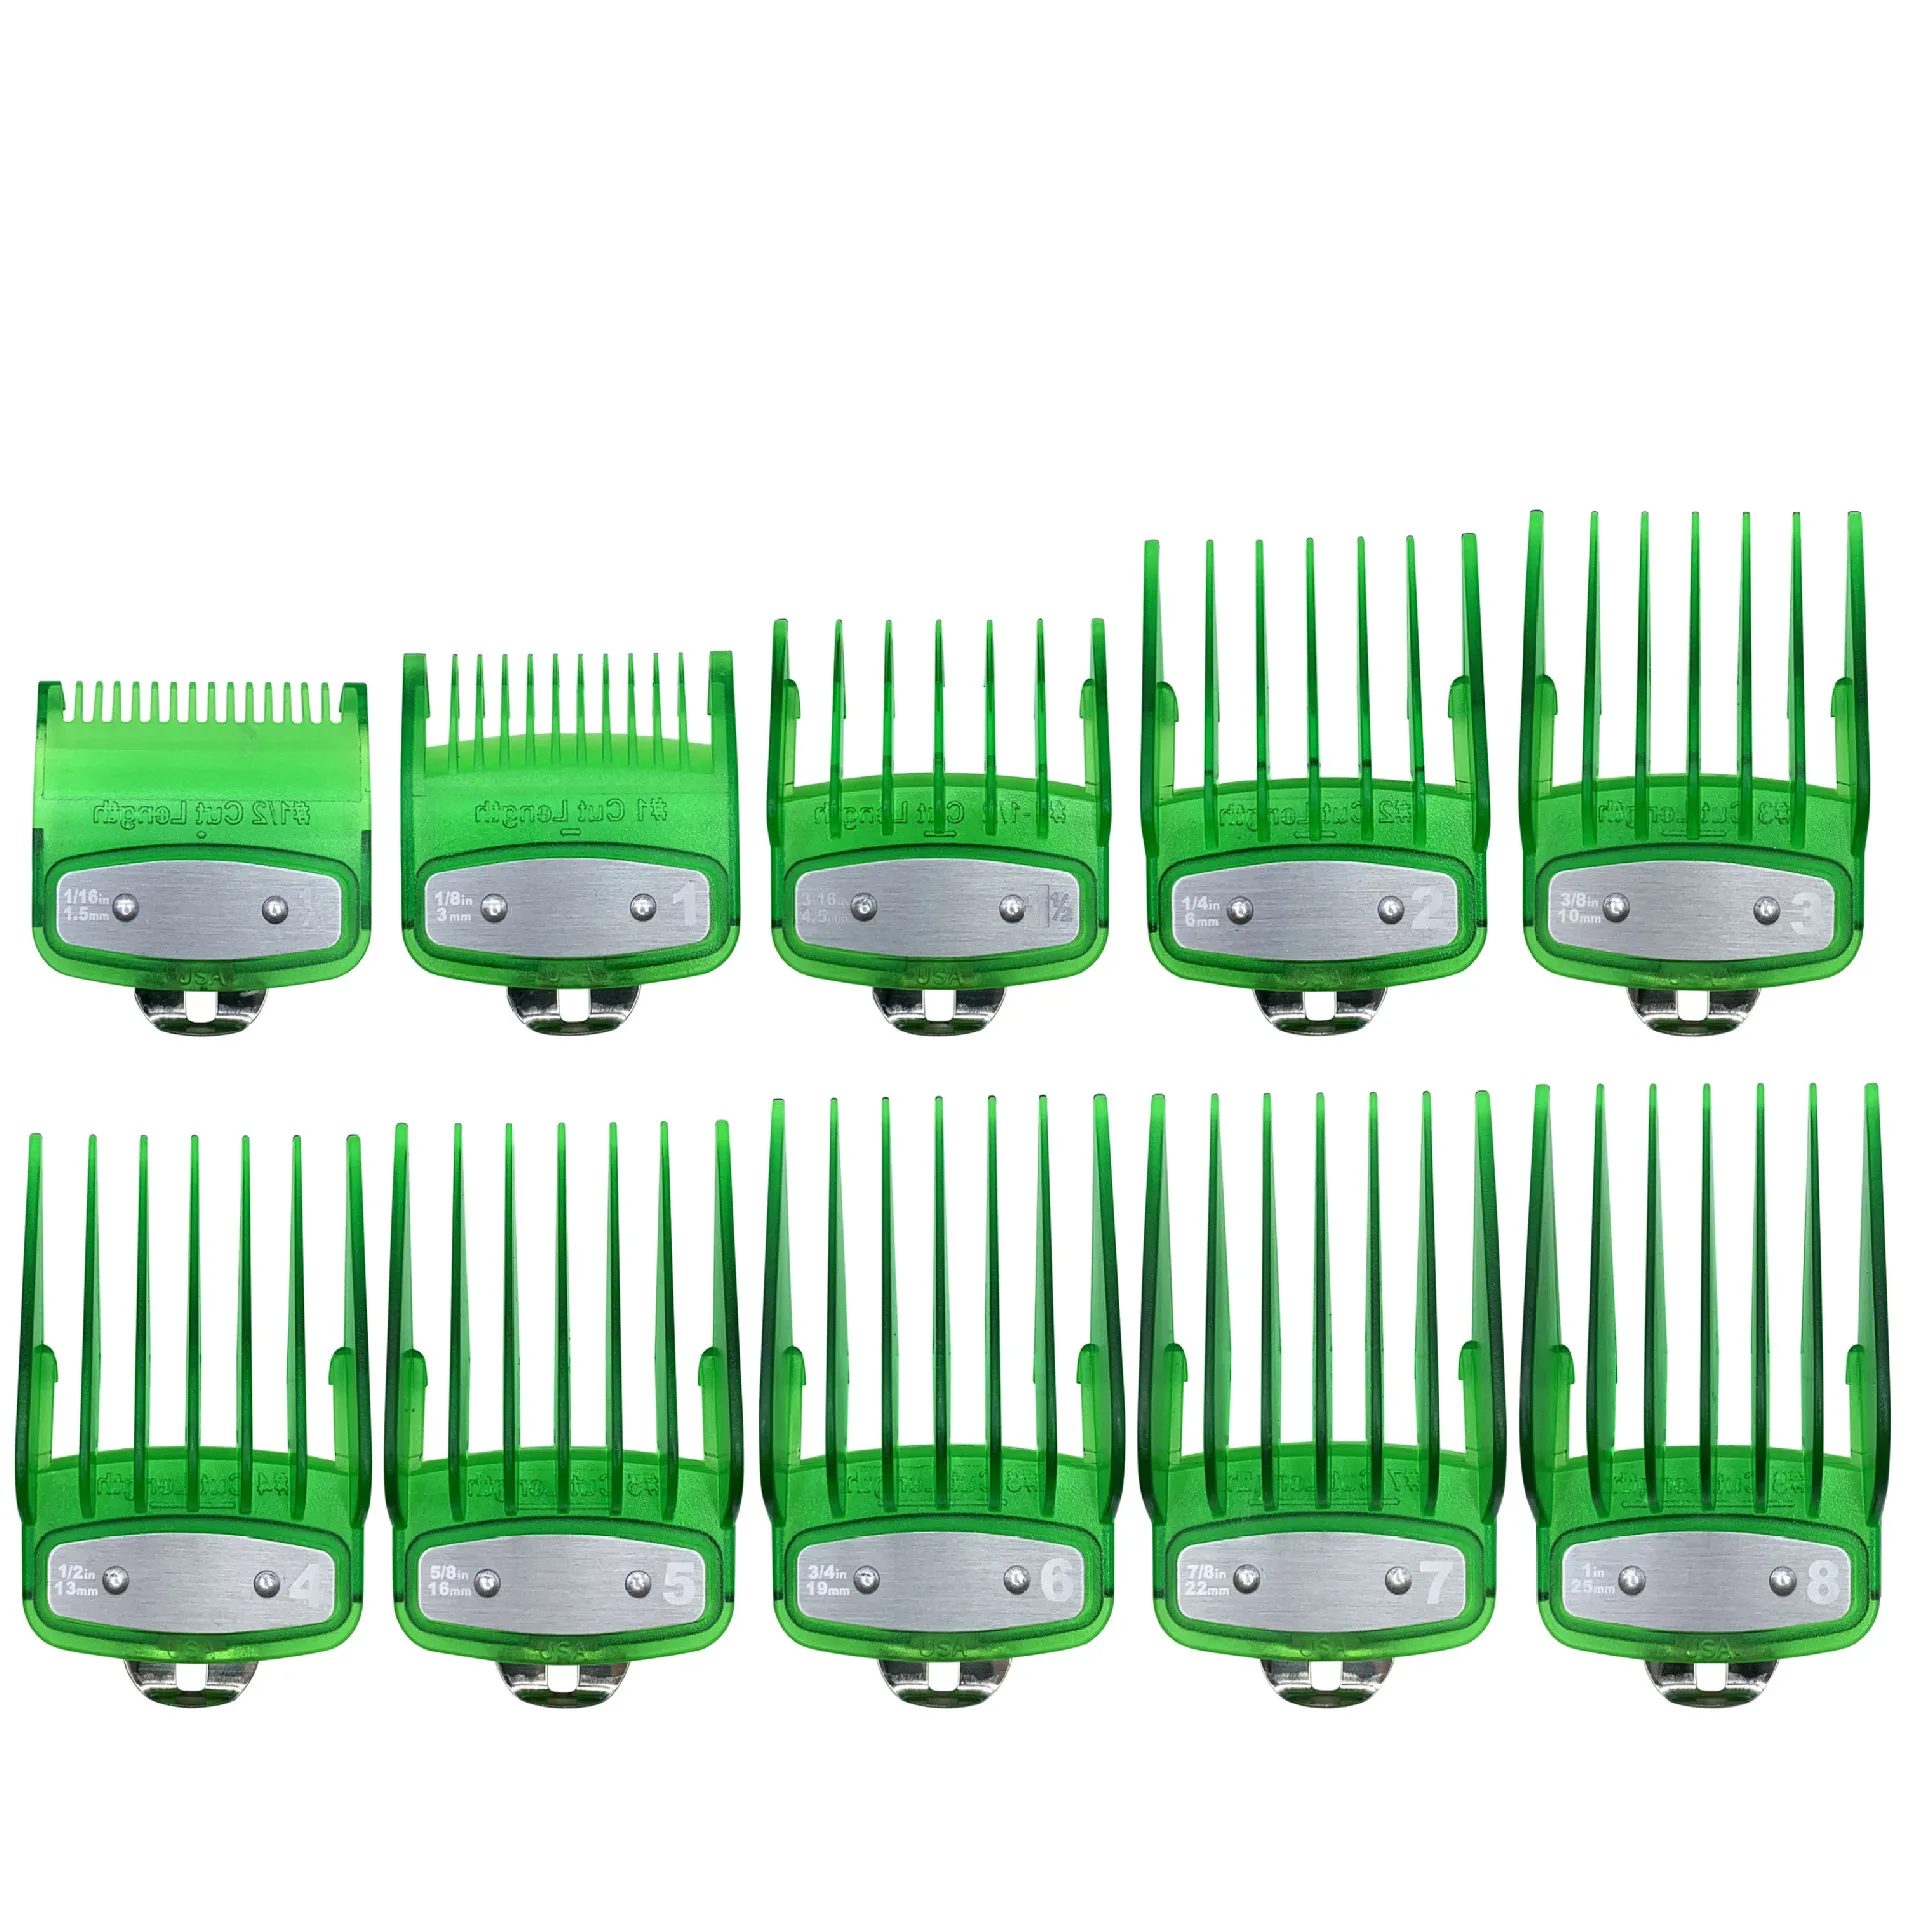 10Pcs Universal Transparent Hair Clipper Guards For Wahl Clippers Barber Accessories Professional Trimmer Attachment Limit Combs